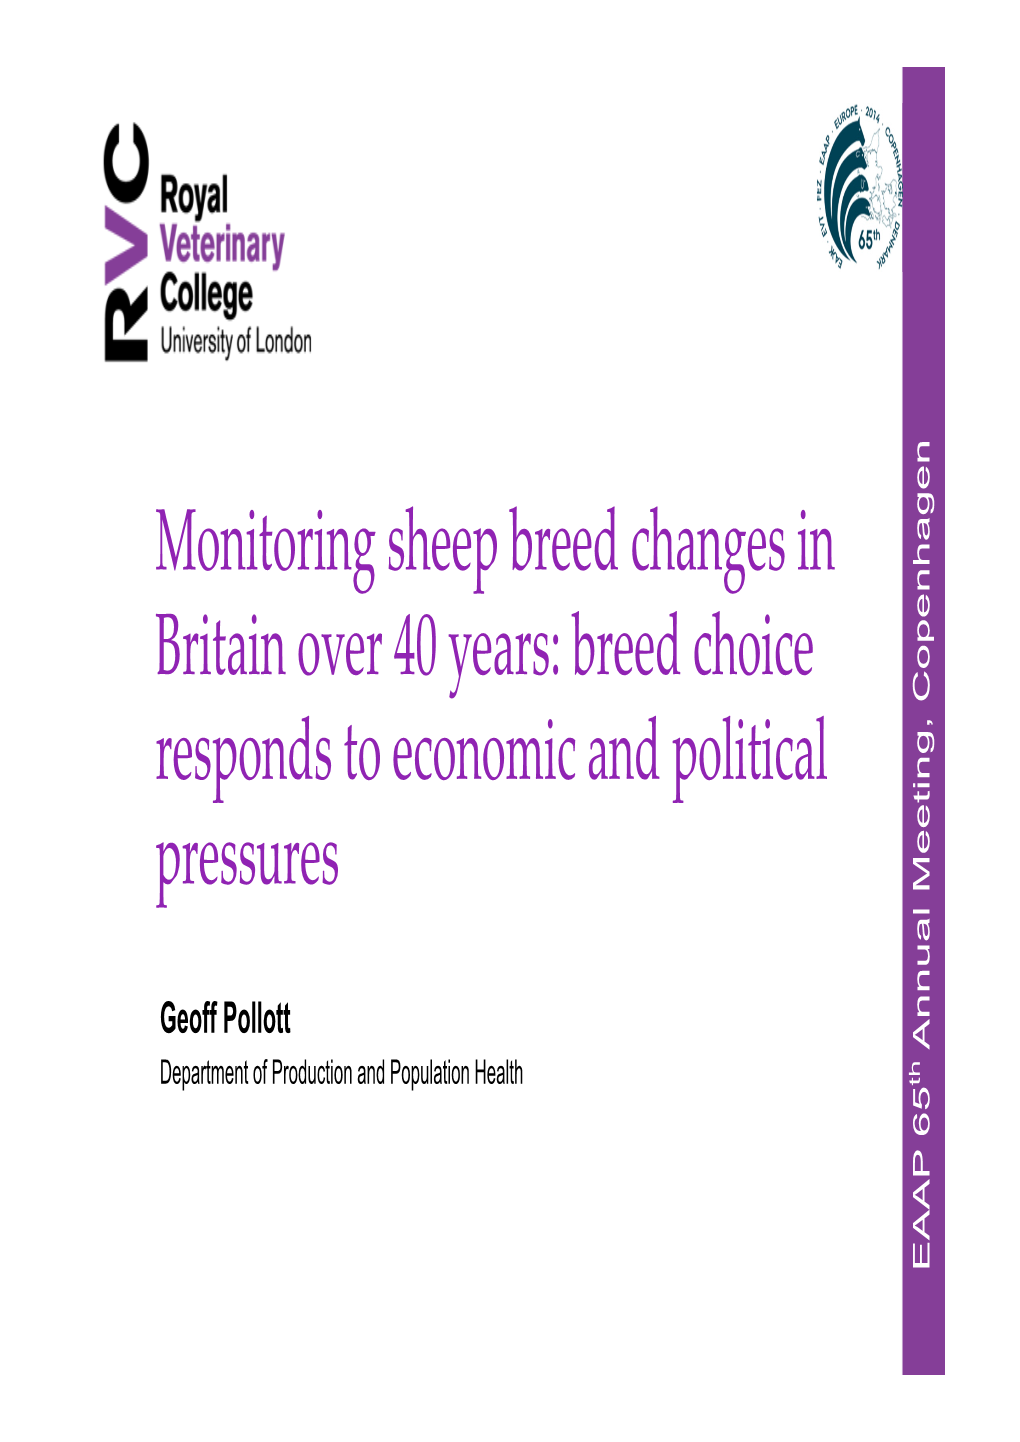 Monitoring Sheep Breed Changes in Britain Over 40 Years: Breed Choice Responds to Economic and Political Pressures